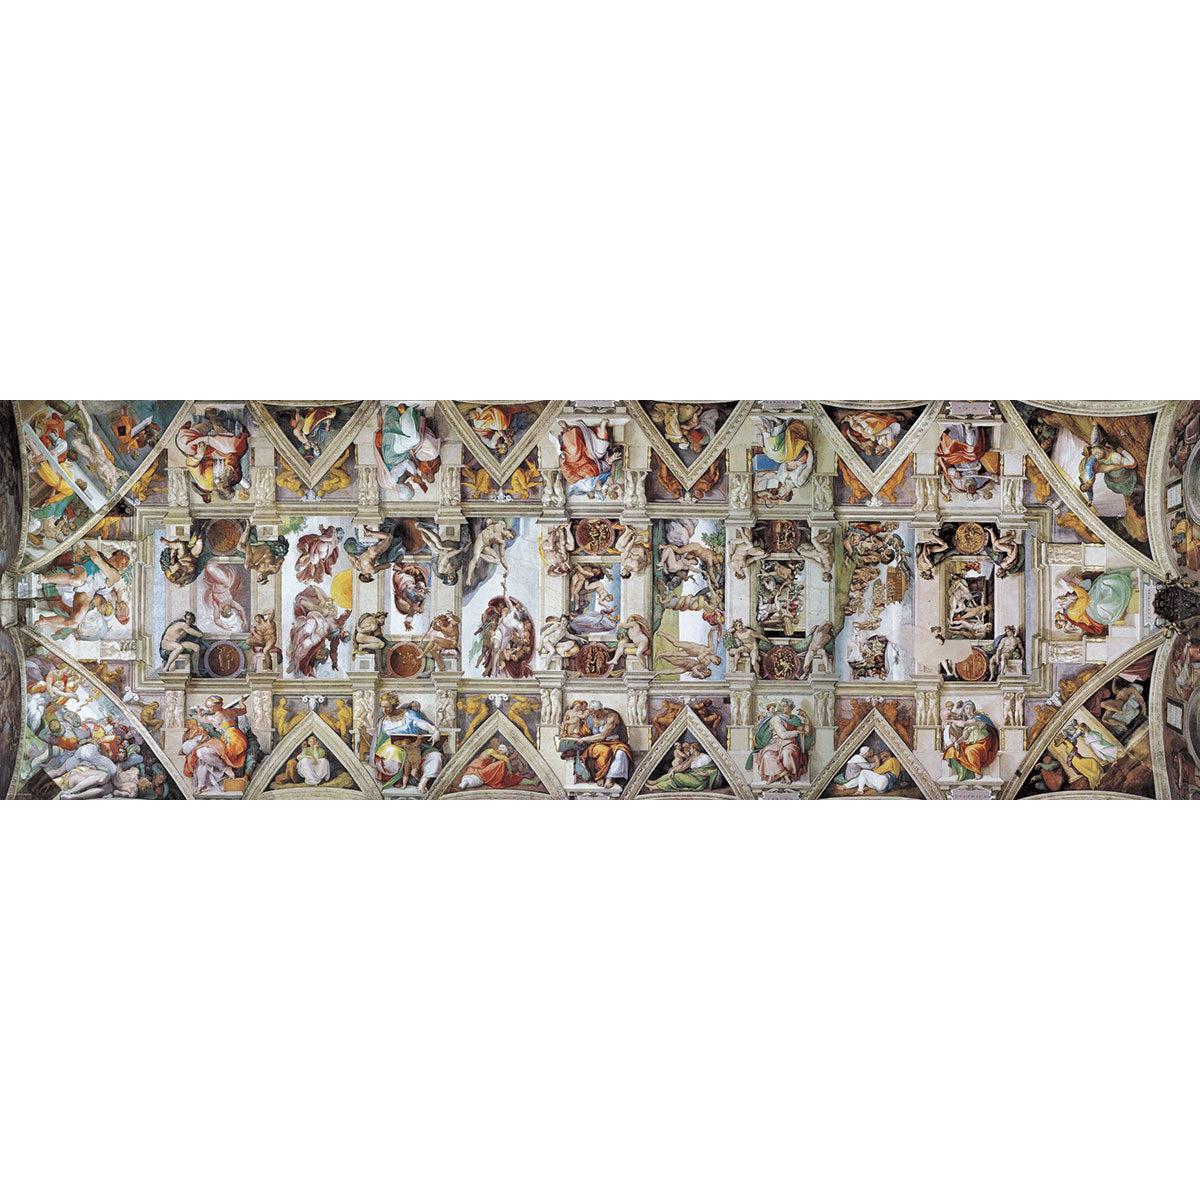 The Sistine Chapel Ceiling 1000 Piece Panoramic Jigsaw Puzzle Eurographics